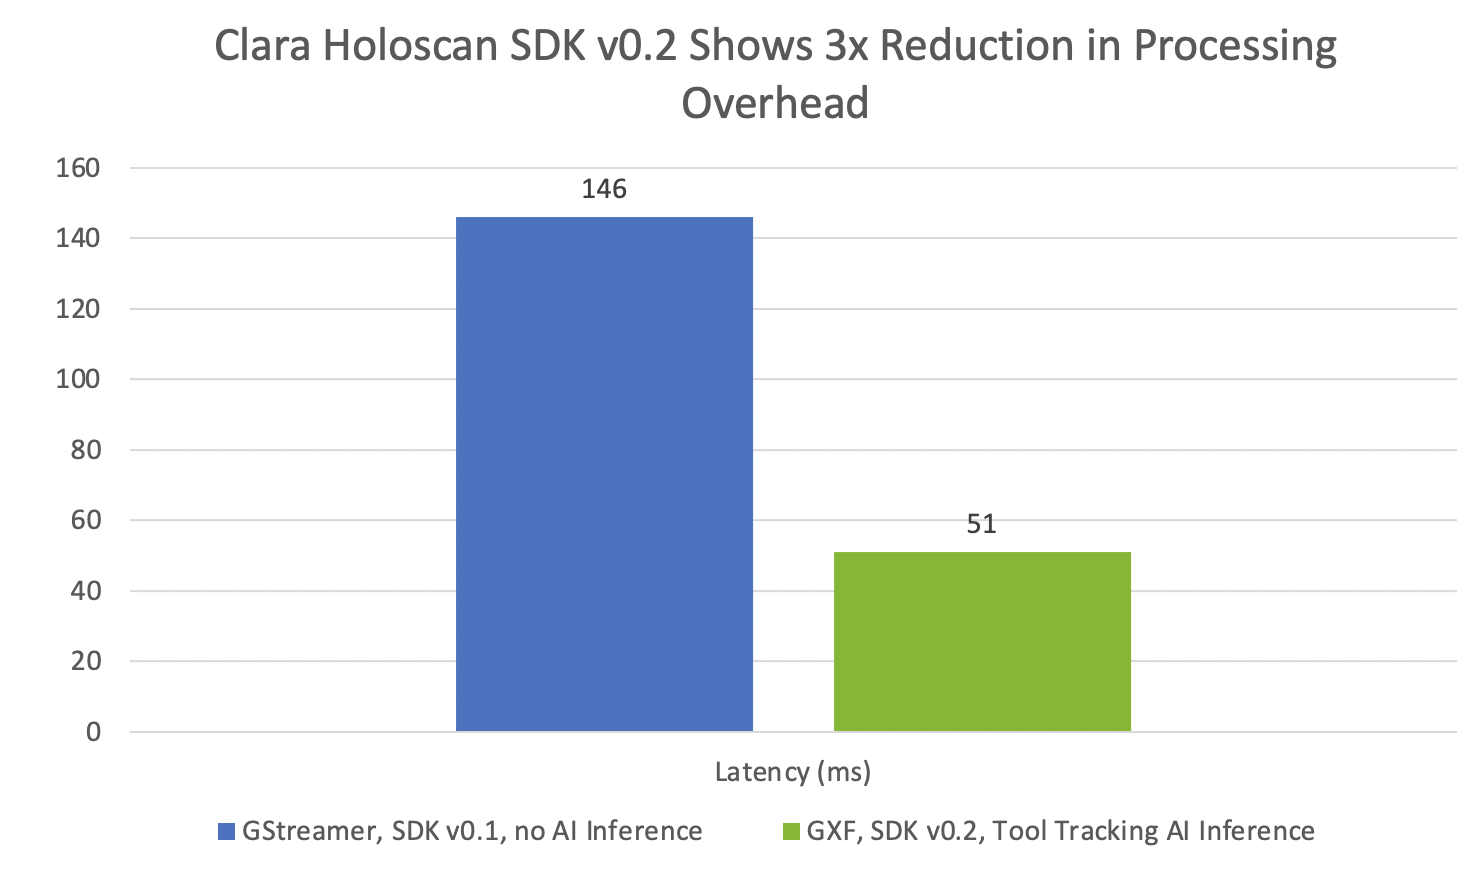 Chart showing reduced latency with GXF in v0.2 at 51 ms compared to 146 ms in v0.1